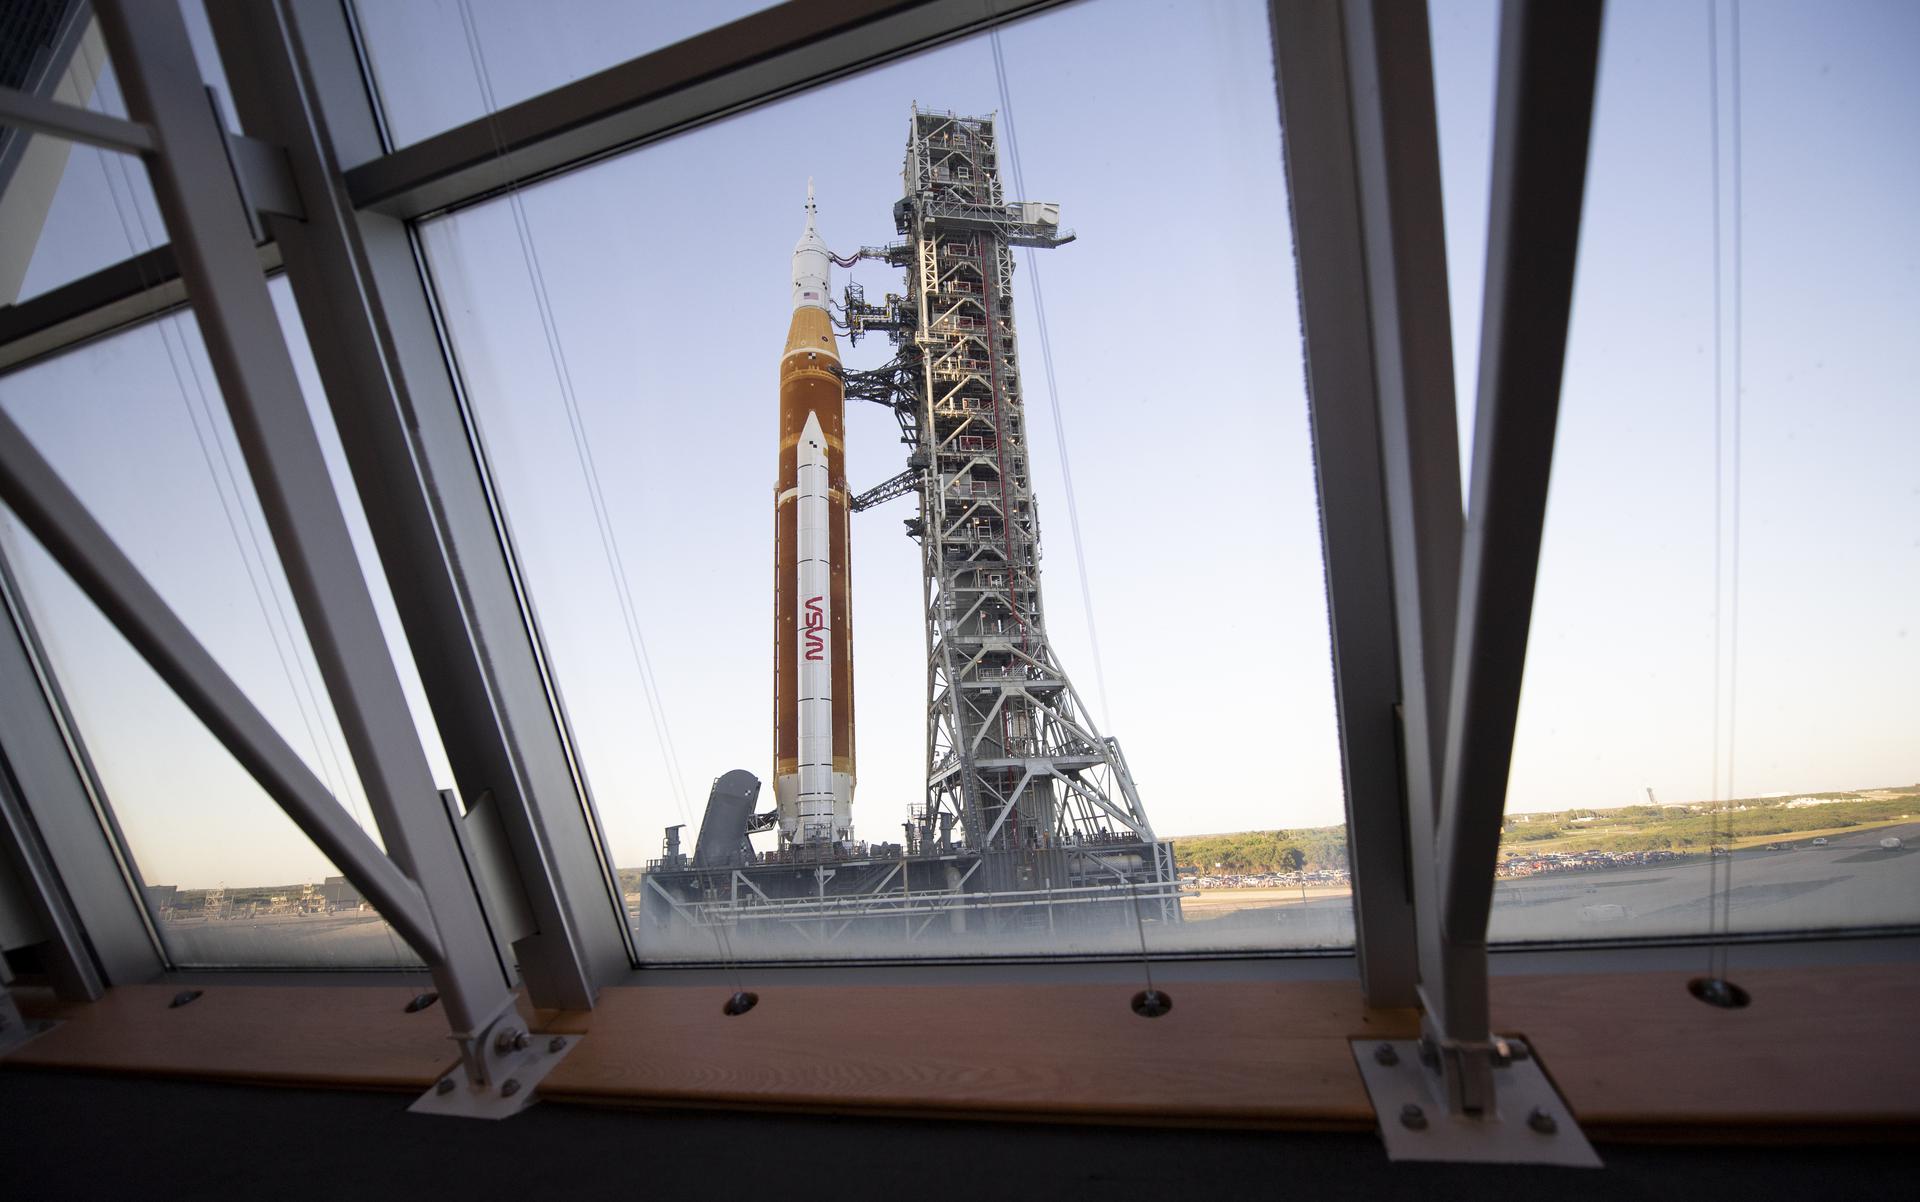 NASA’s Space Launch System (SLS) rocket with the Orion spacecraft aboard is seen through the windows of Firing Room One in the Rocco A. Petrone Launch Control Center at NASA’s Kennedy Space Center in Florida.